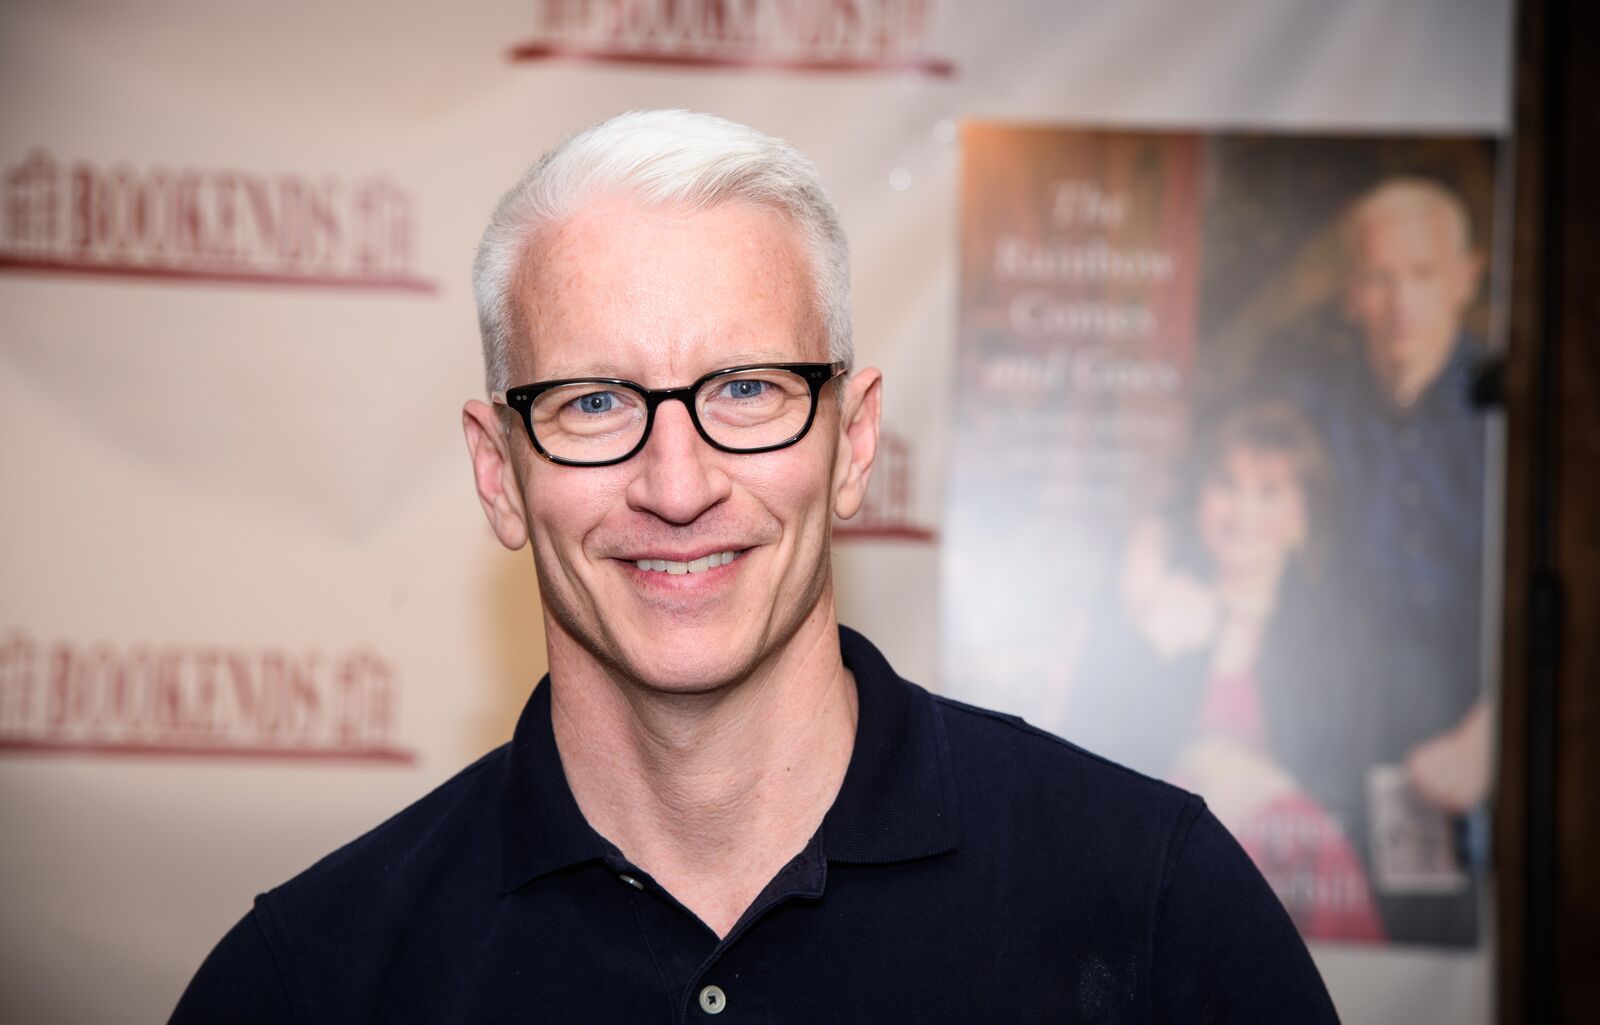 Anderson Cooper signs copies of his book "The Rainbow Comes and Goes" on April 24, 2016, in Ridgewood, New Jersey | Photo: Dave Kotinsky/Getty Images